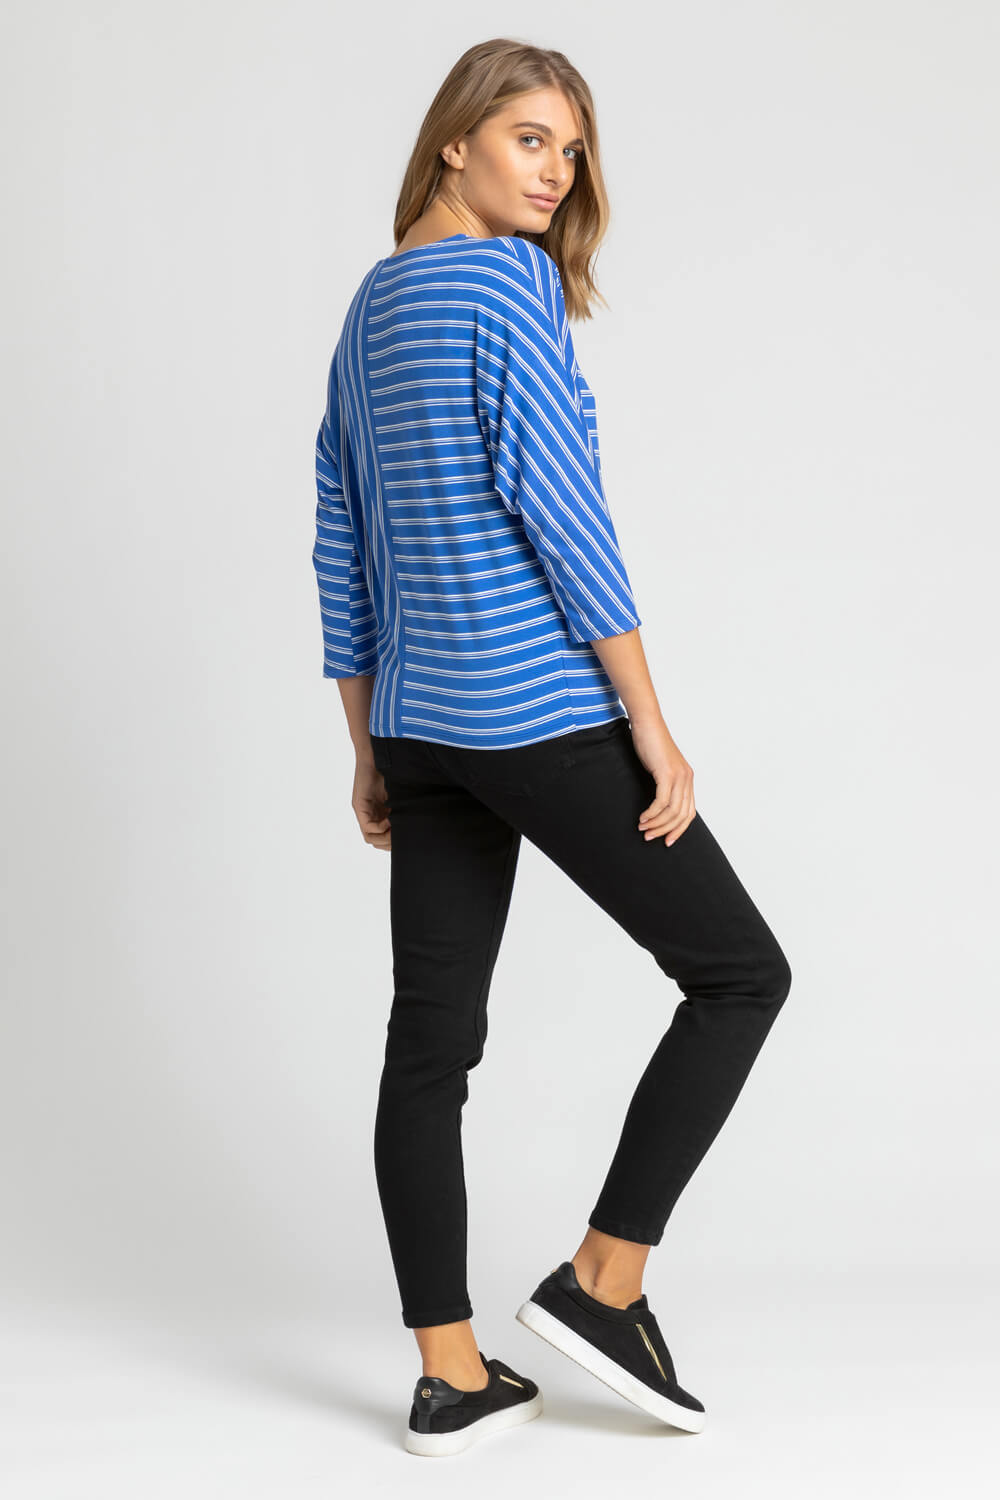 Blue Textured Stripe Print Top, Image 2 of 5